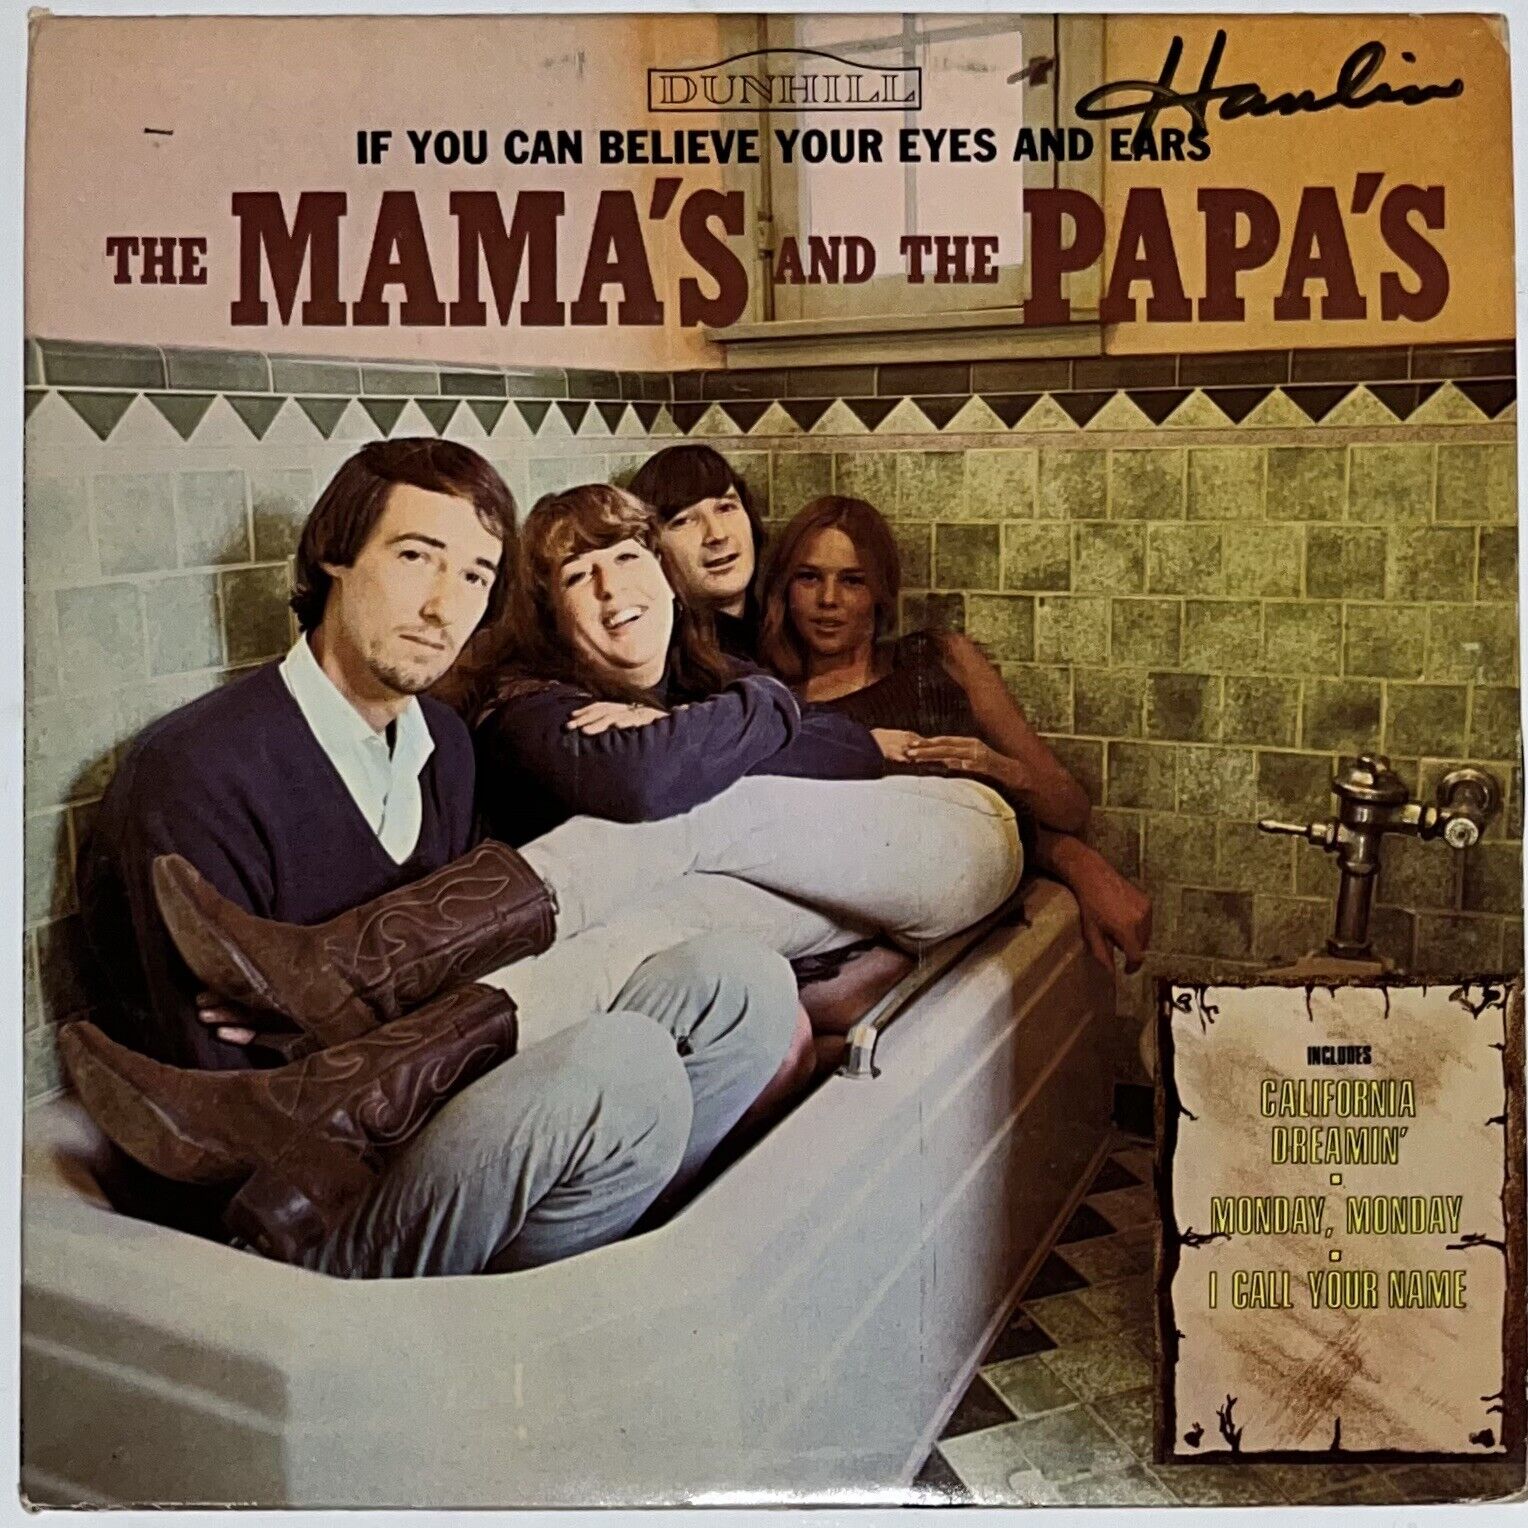 The Mamas & The Papas - If You Can Believe Your Eyes And Ears Vinyl LP - 1966